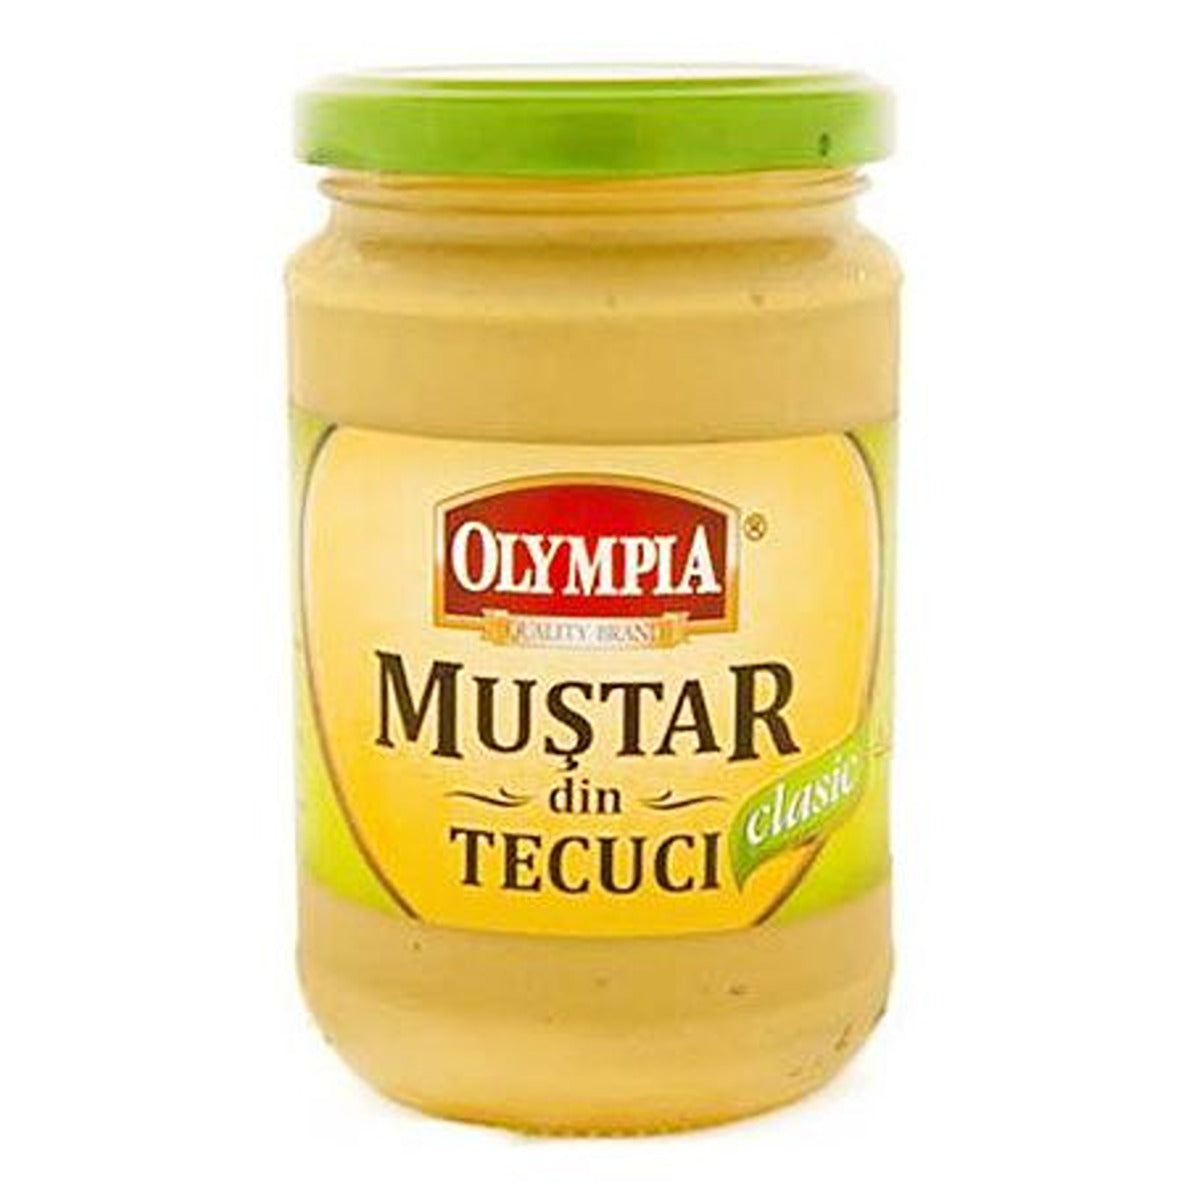 An Olympia - Classic Mustard - 314ml jar on a white background.